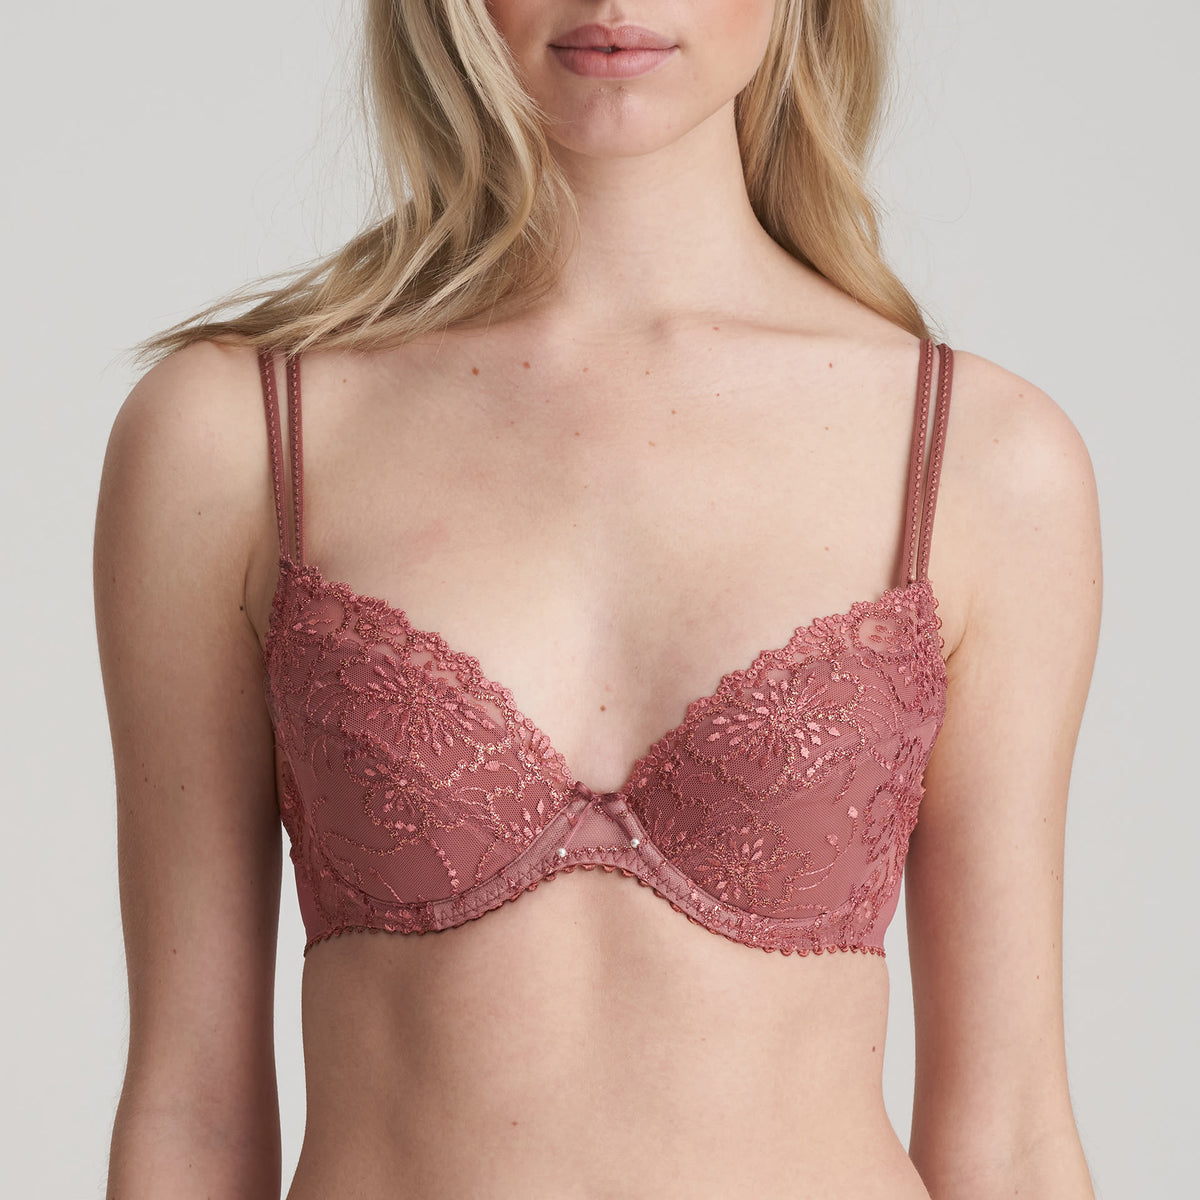 Janelim™ Level-3 Push Up bra with underwire Cup A/B 8230